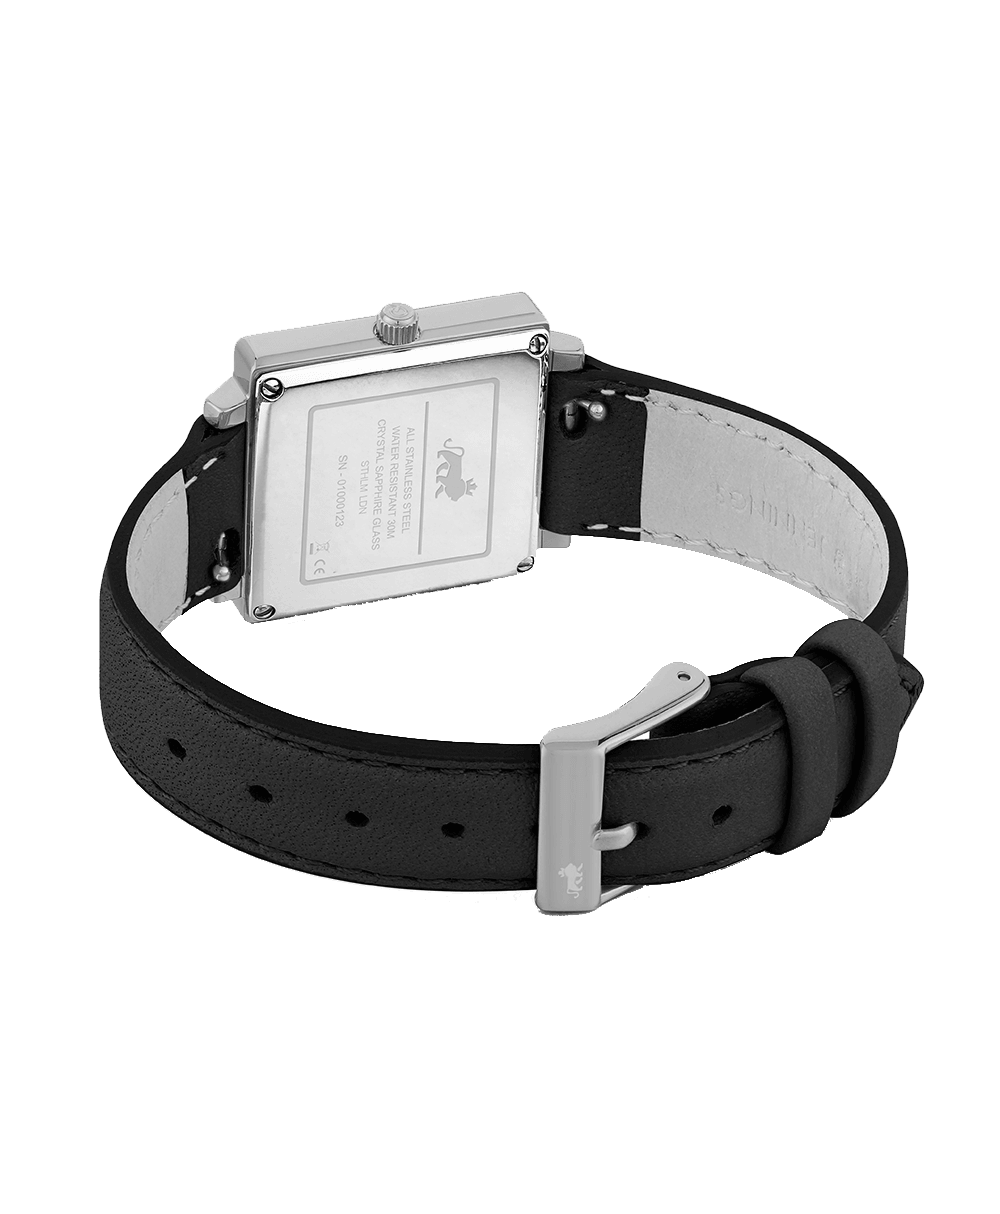 Norse Leather 34mm Silver White